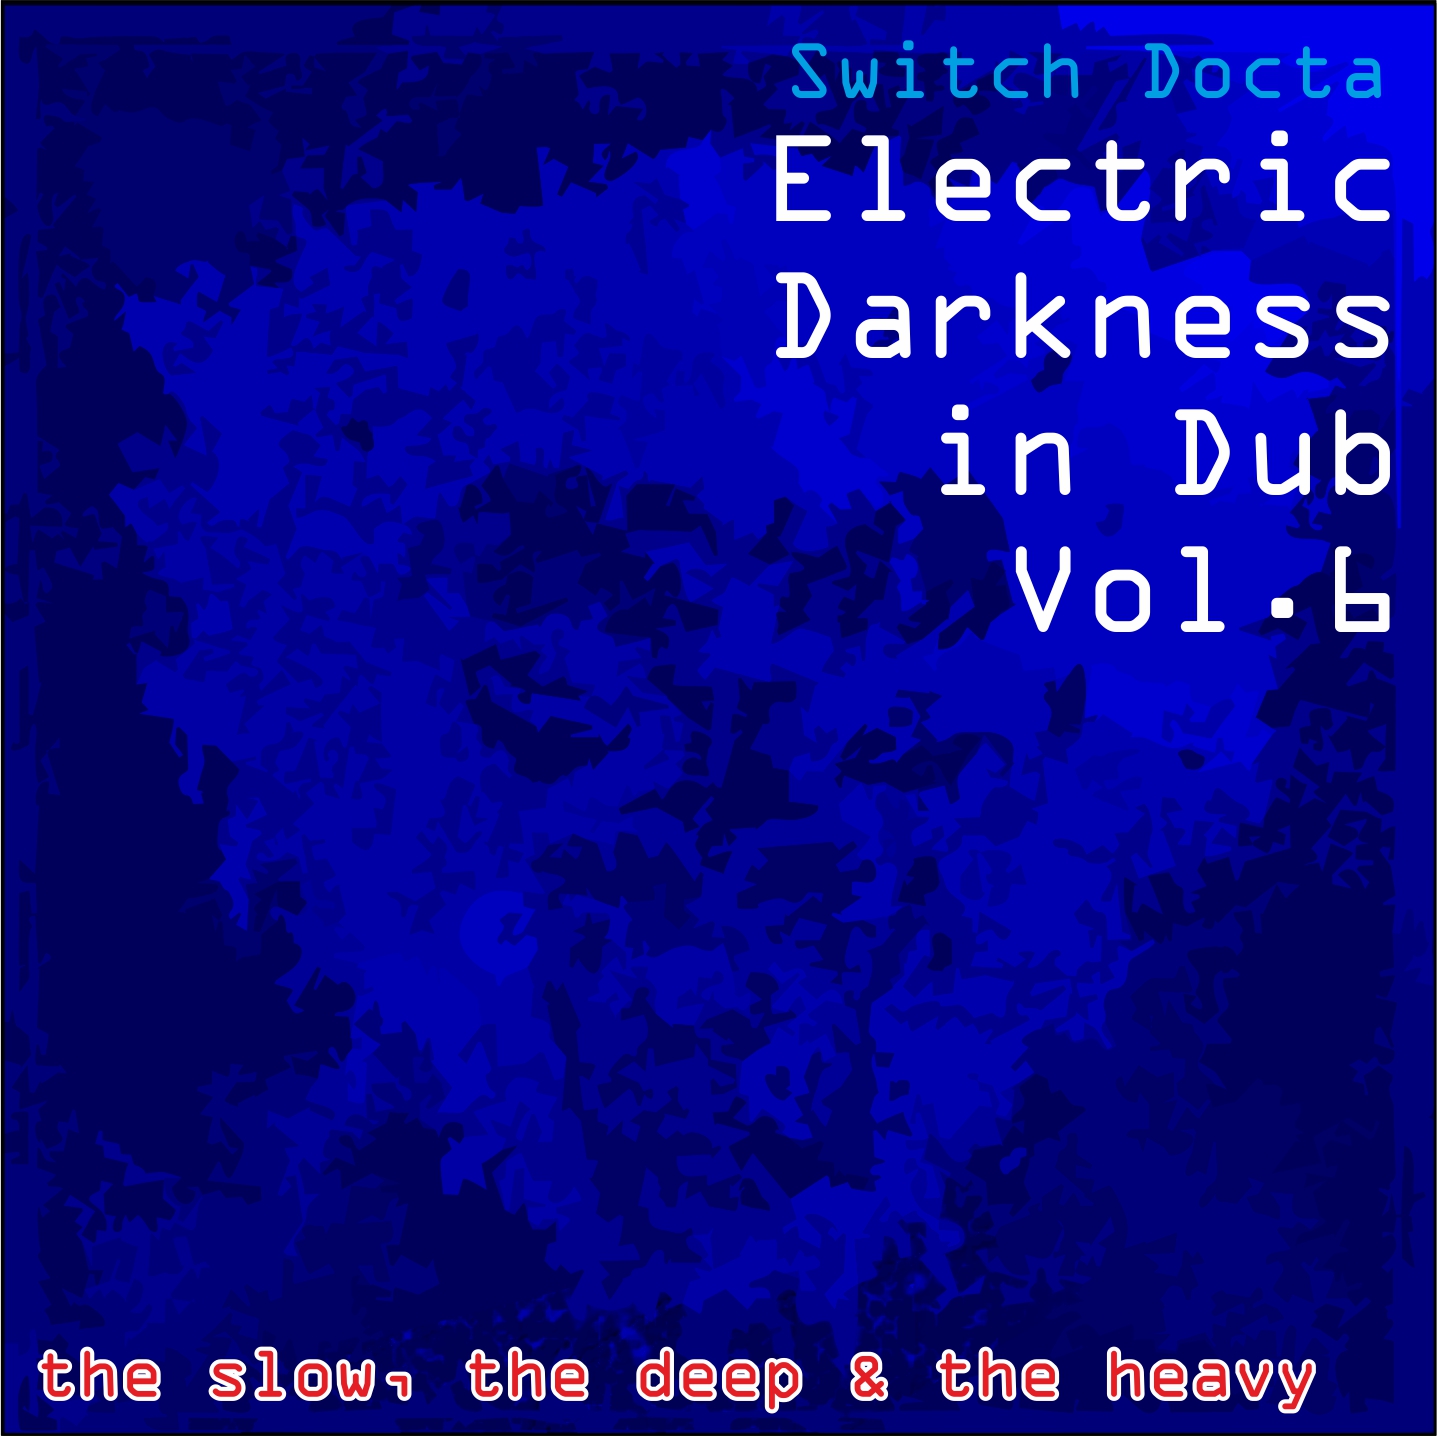 Electric Darkness in Dub Vol. 6 (the slow, the deep &amp; the heavy)